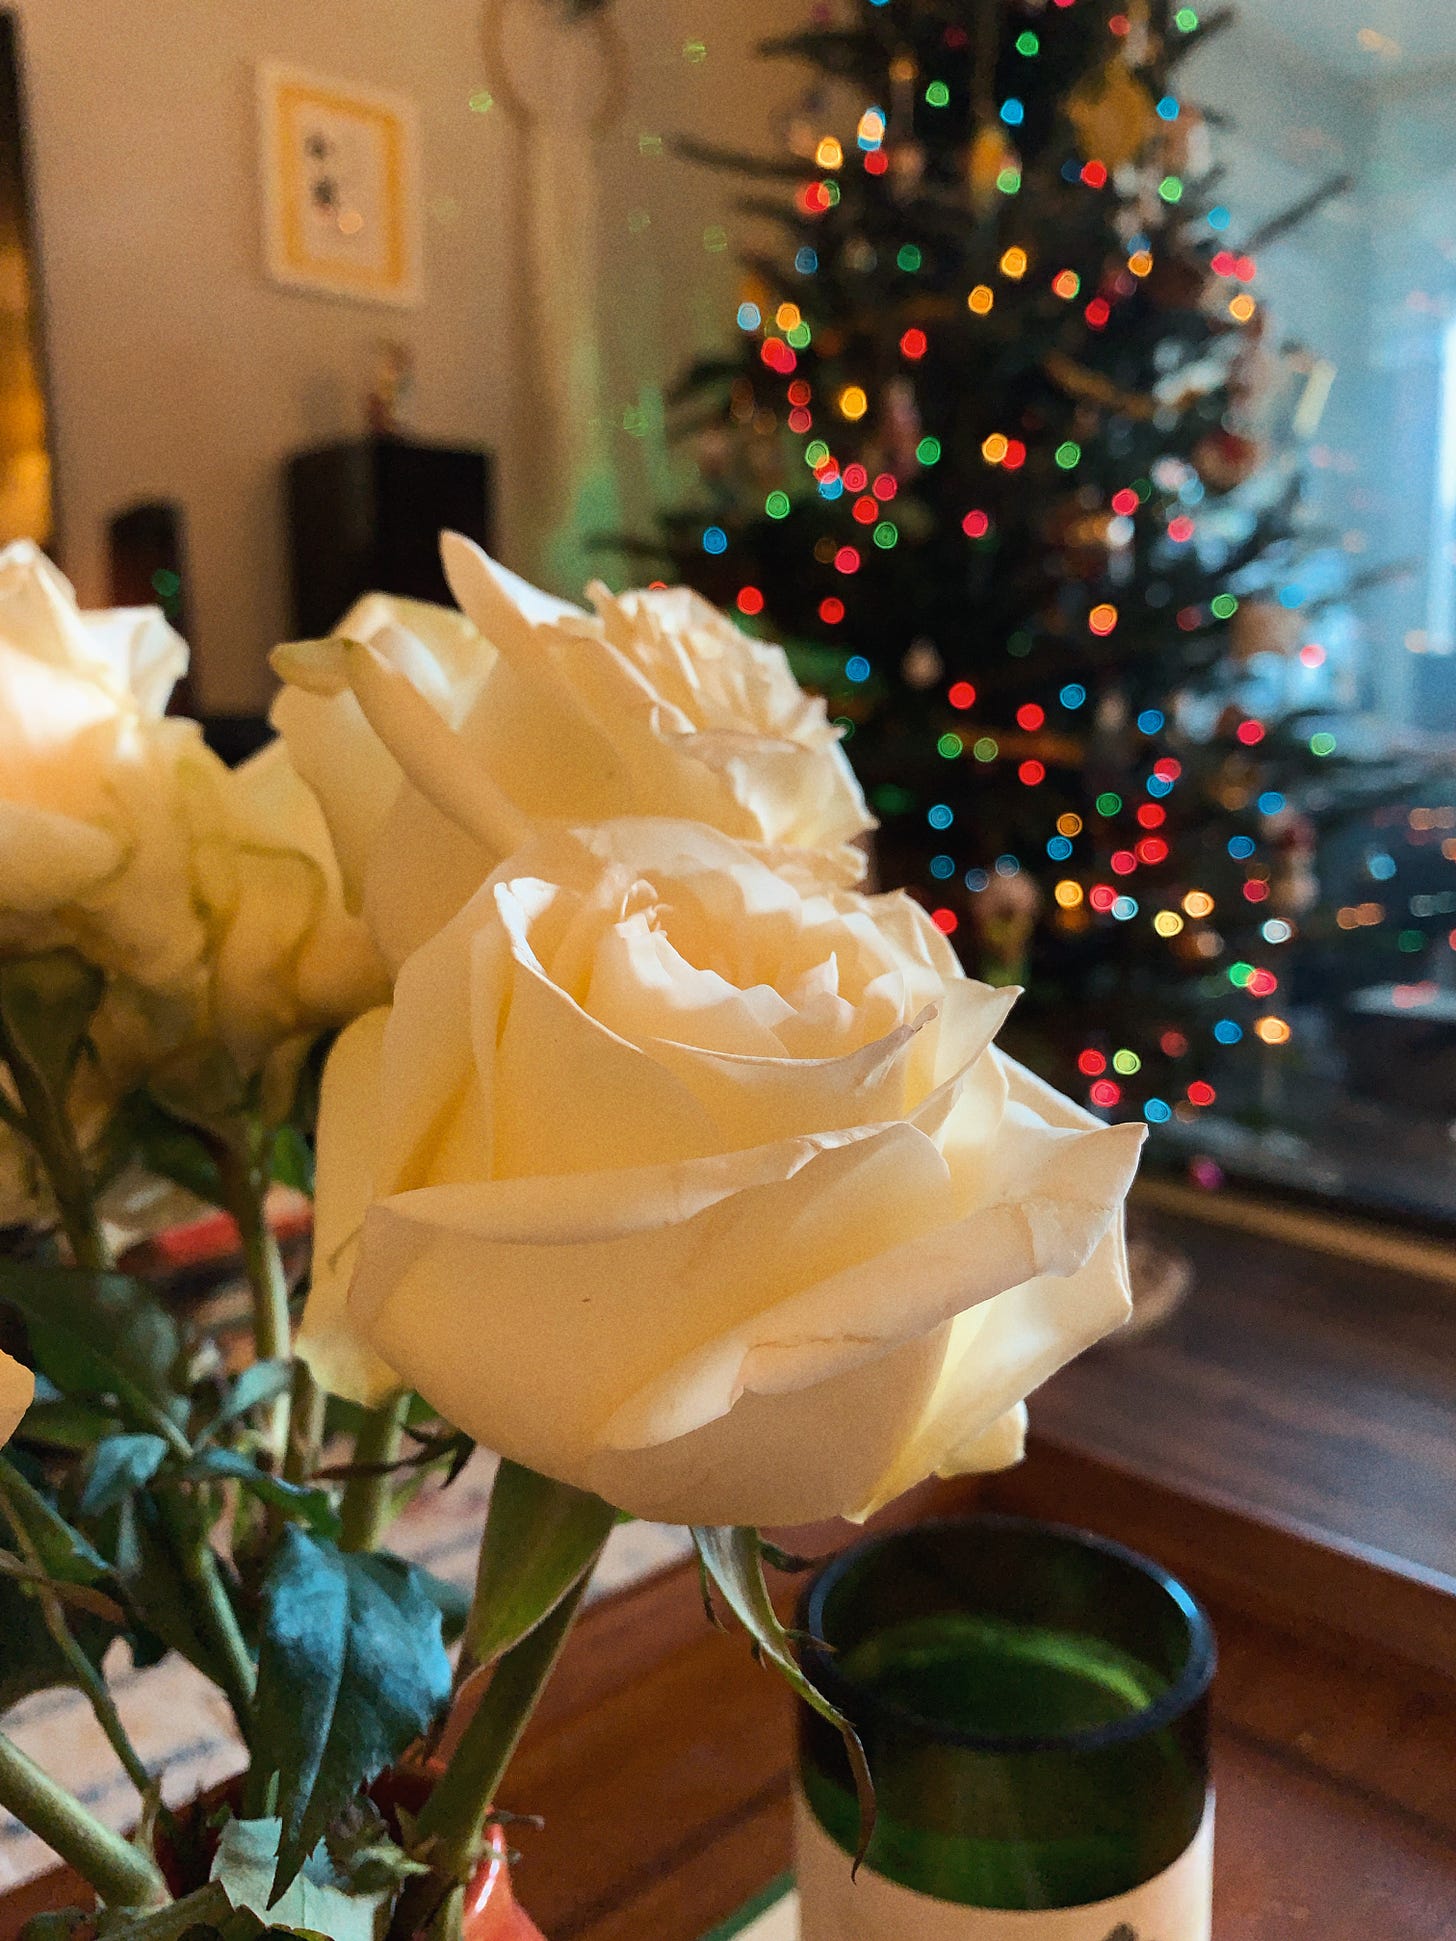 Bouquet of white roses in the foreground with a colorful Christmas tree behind it with bokeh lights.